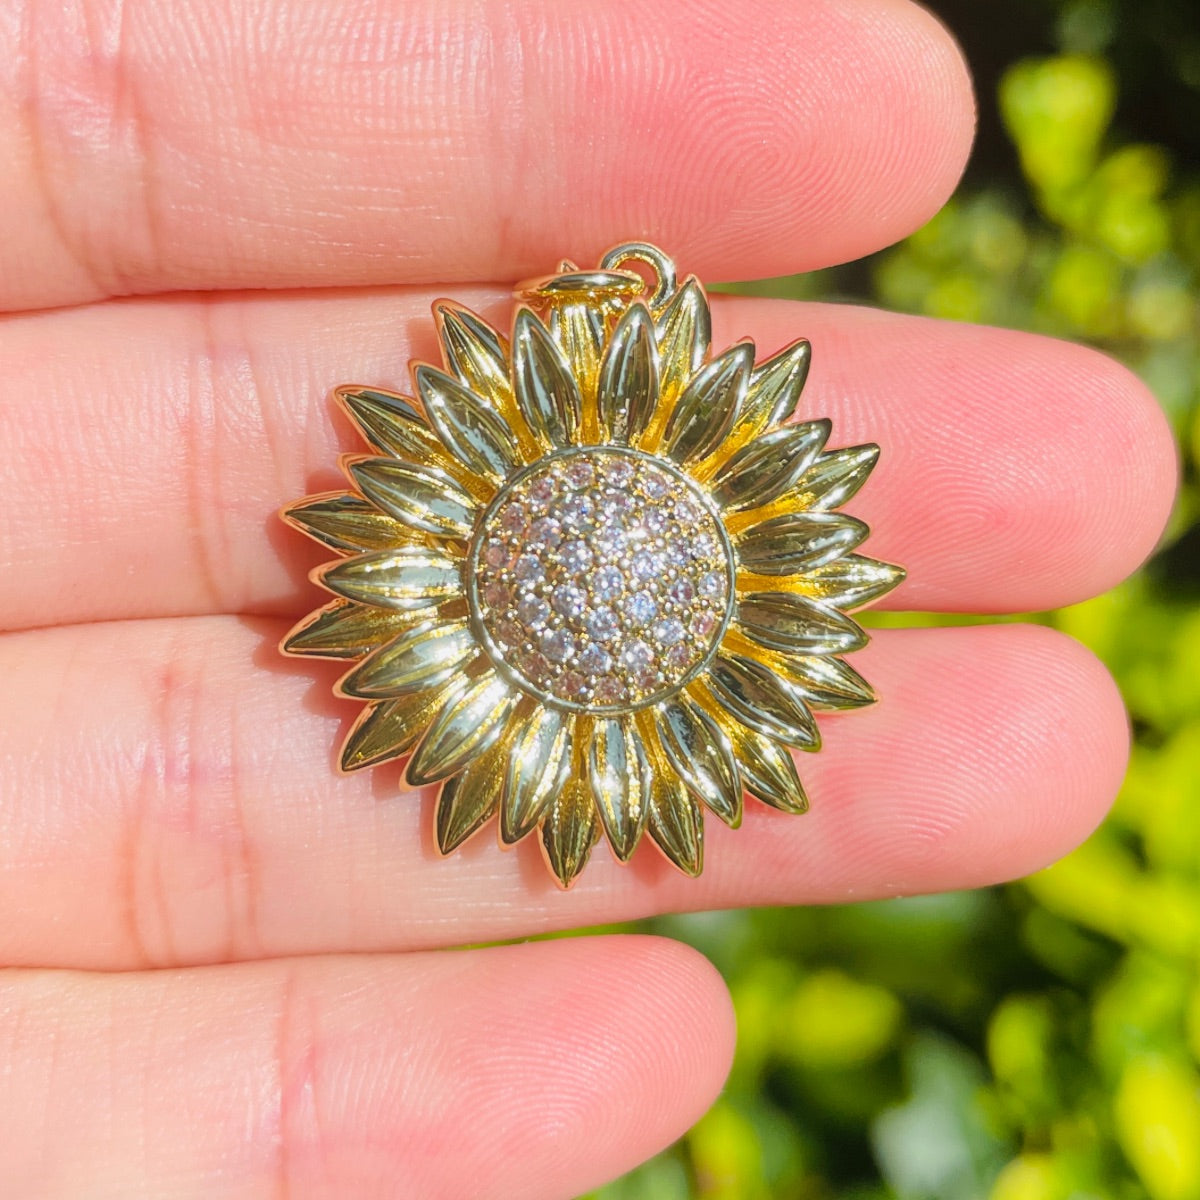 10pcs/lot 29mm CZ Paved Sunflower Charms Gold CZ Paved Charms Flowers Charms Beads Beyond